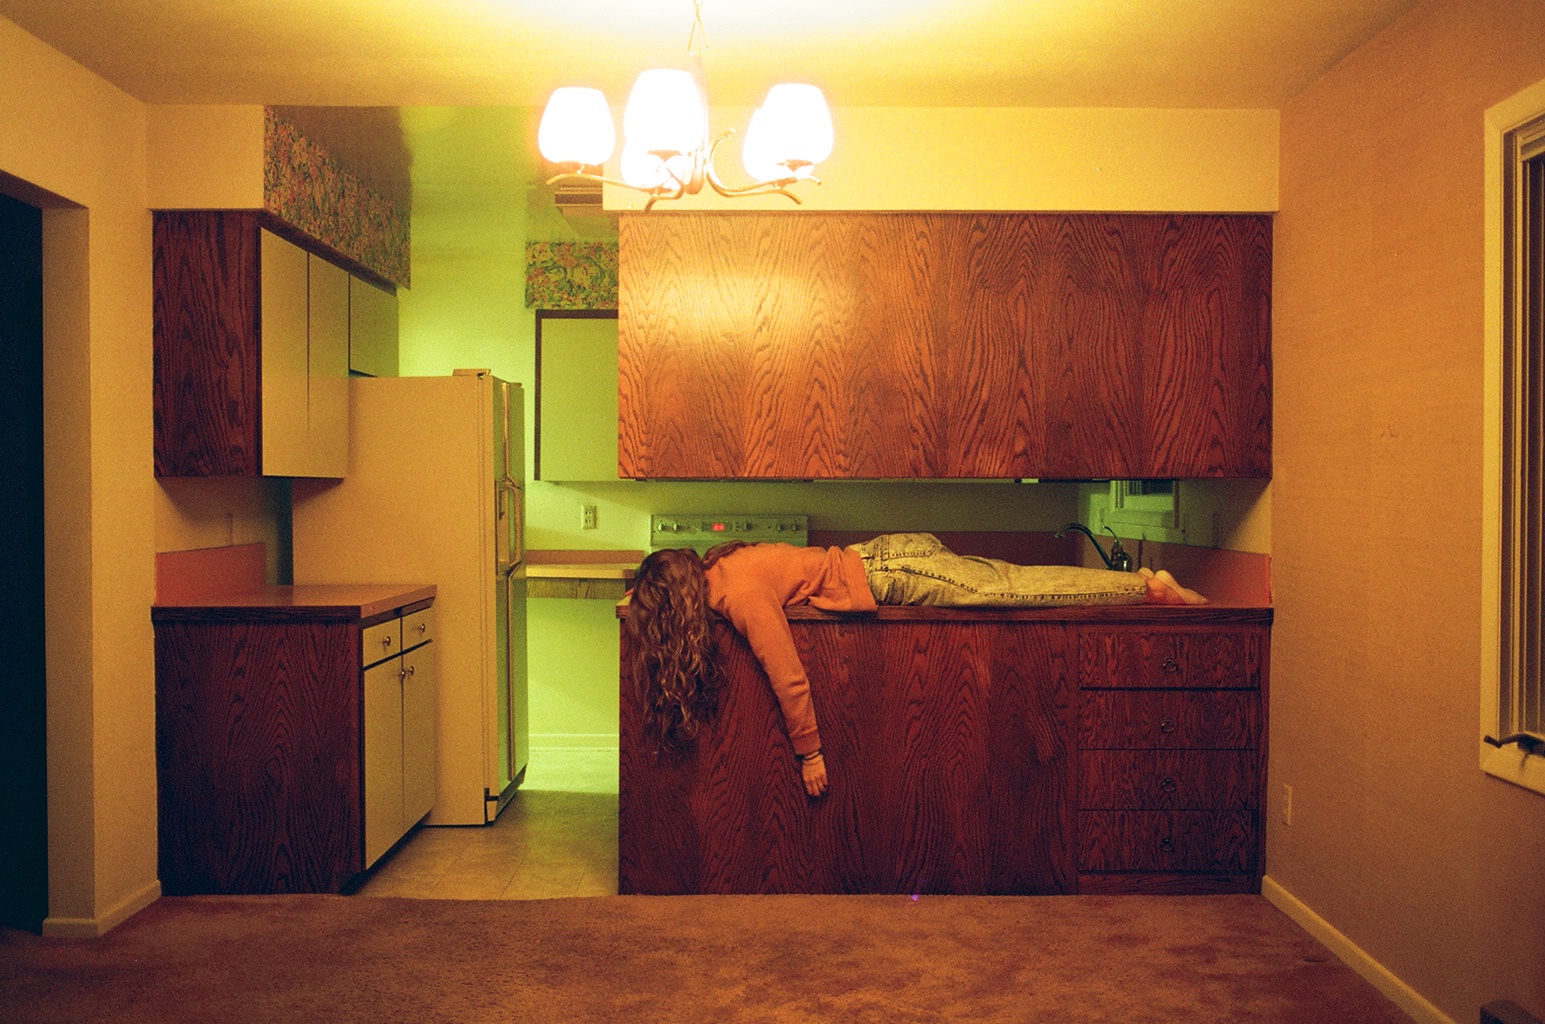 the kitchen i learned to cook in 35mm self portrait emily berkey.jpg